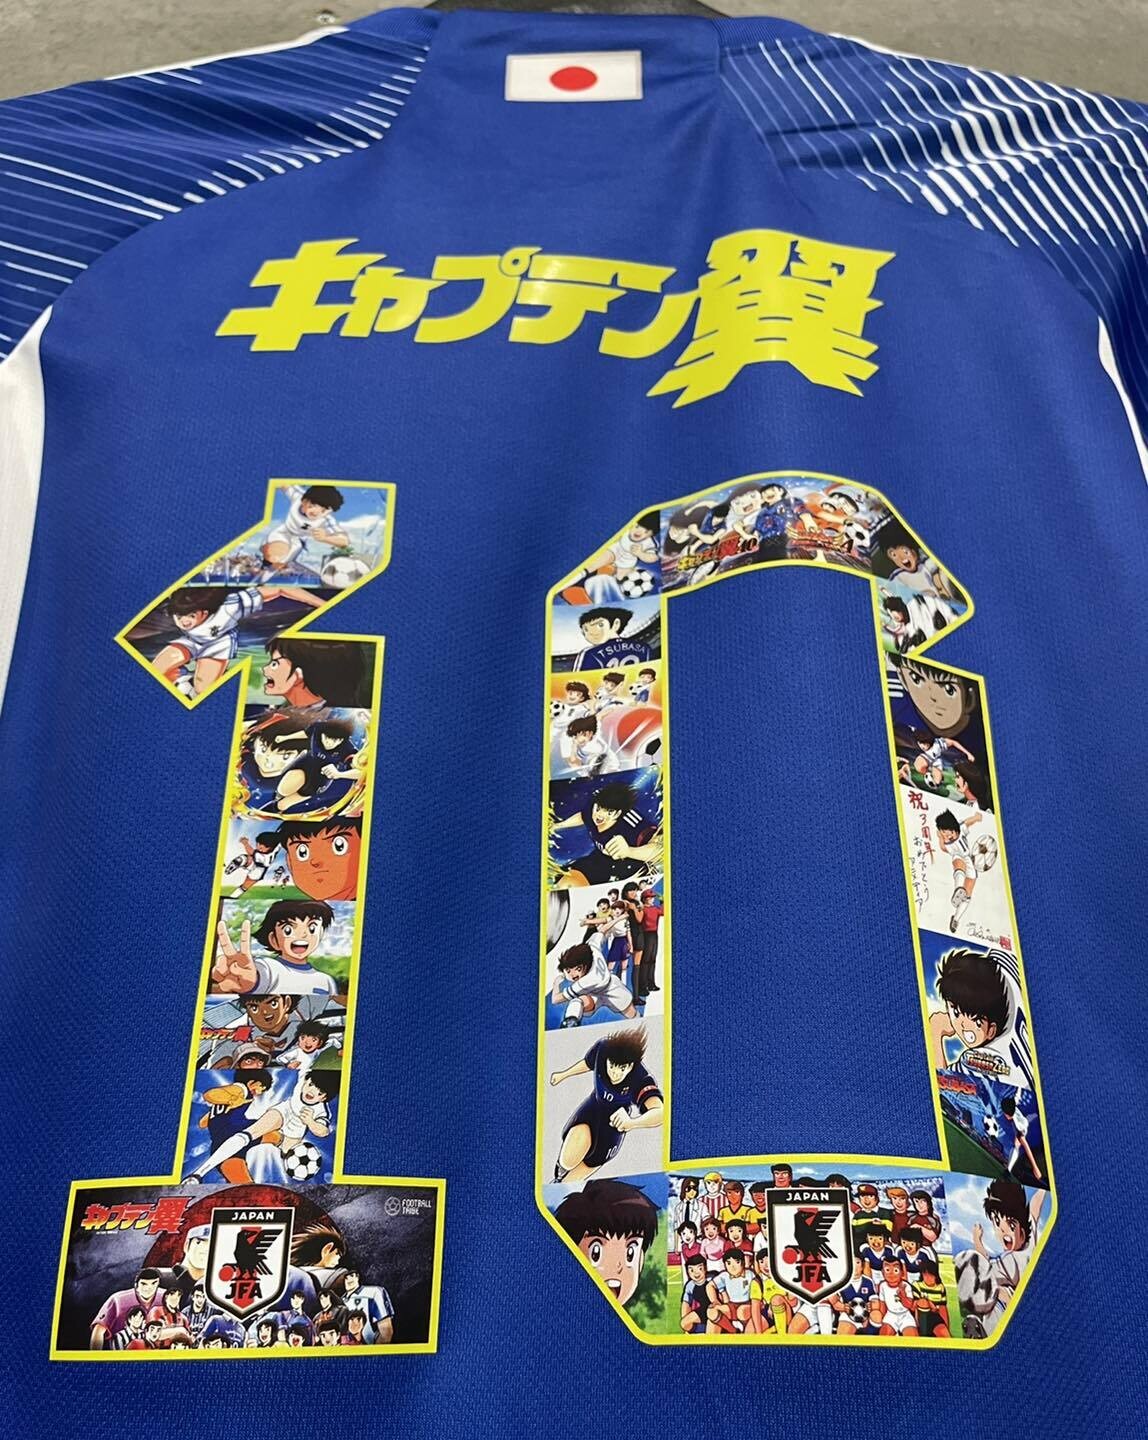 GIAPPONE JAPAN MAGLIA JERSEY CAMISETAS  2023 TSUBASA HOLLY AND BENJY